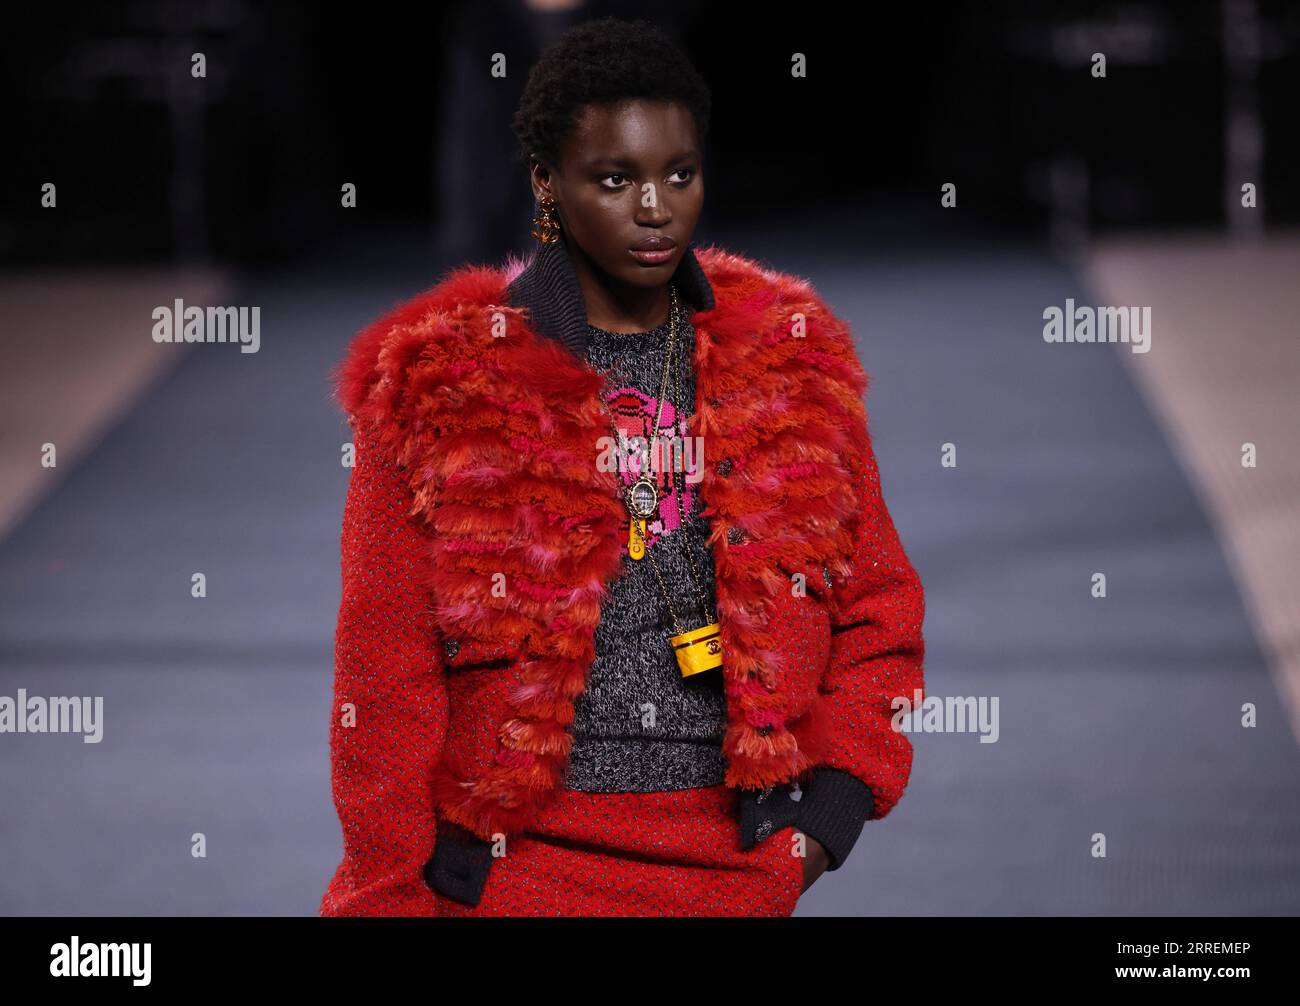 220308 -- PARIS, March 8, 2022 -- A model presents a creation of French  fashion house Chanel s Fall/Winter 2022 ready-to-wear collections during  Paris Fashion Week in Paris, France, on March 8